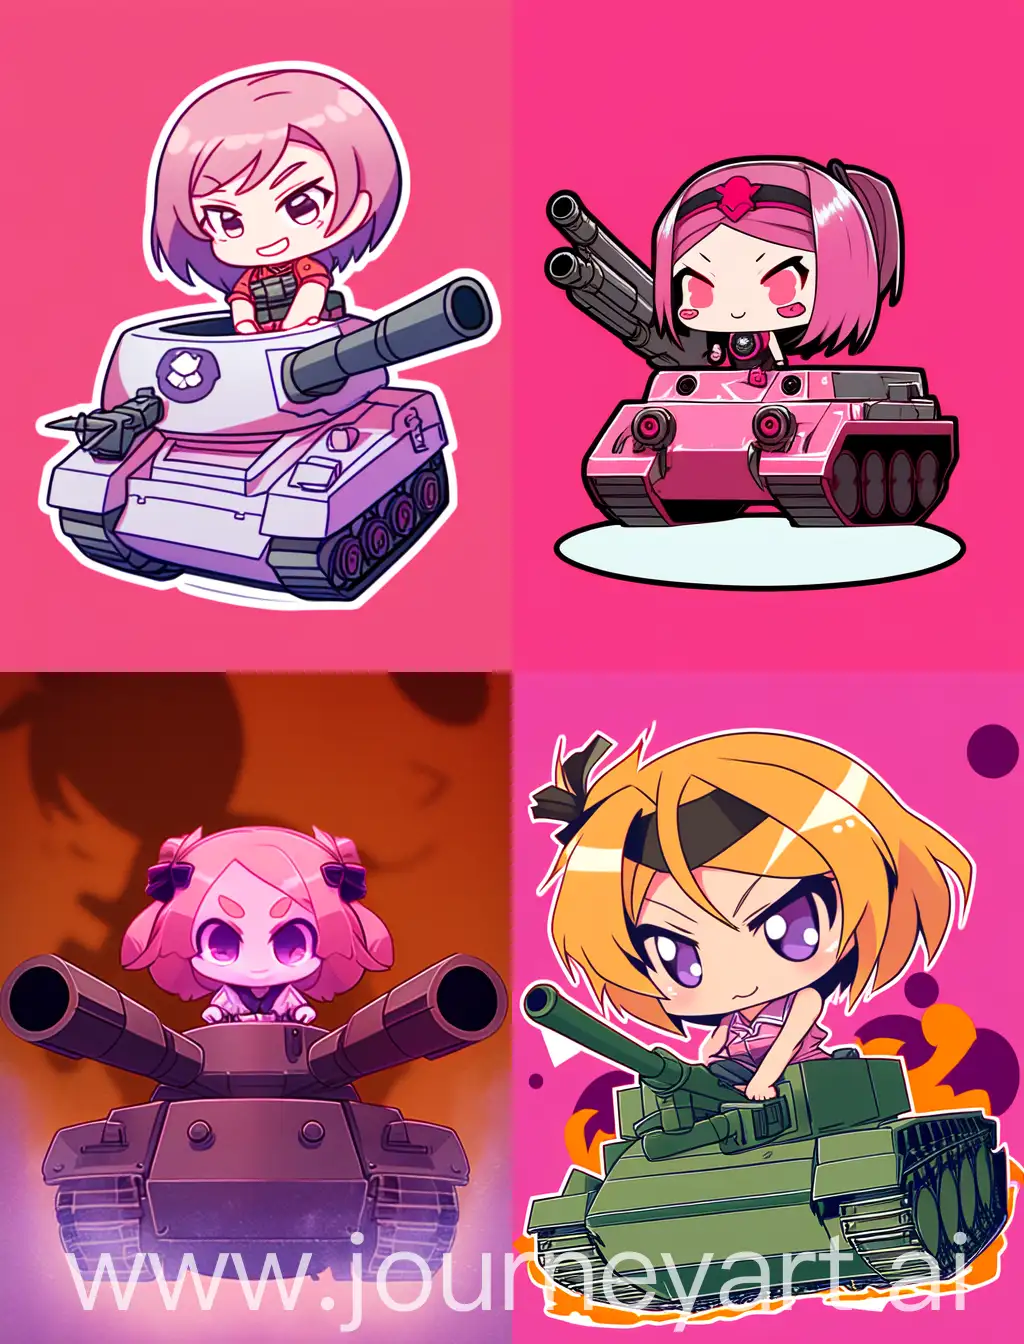 angry chibi anime girl holding a gun, sitting on top of a tank, cartoon anime style, with strong lines, with pink solid background